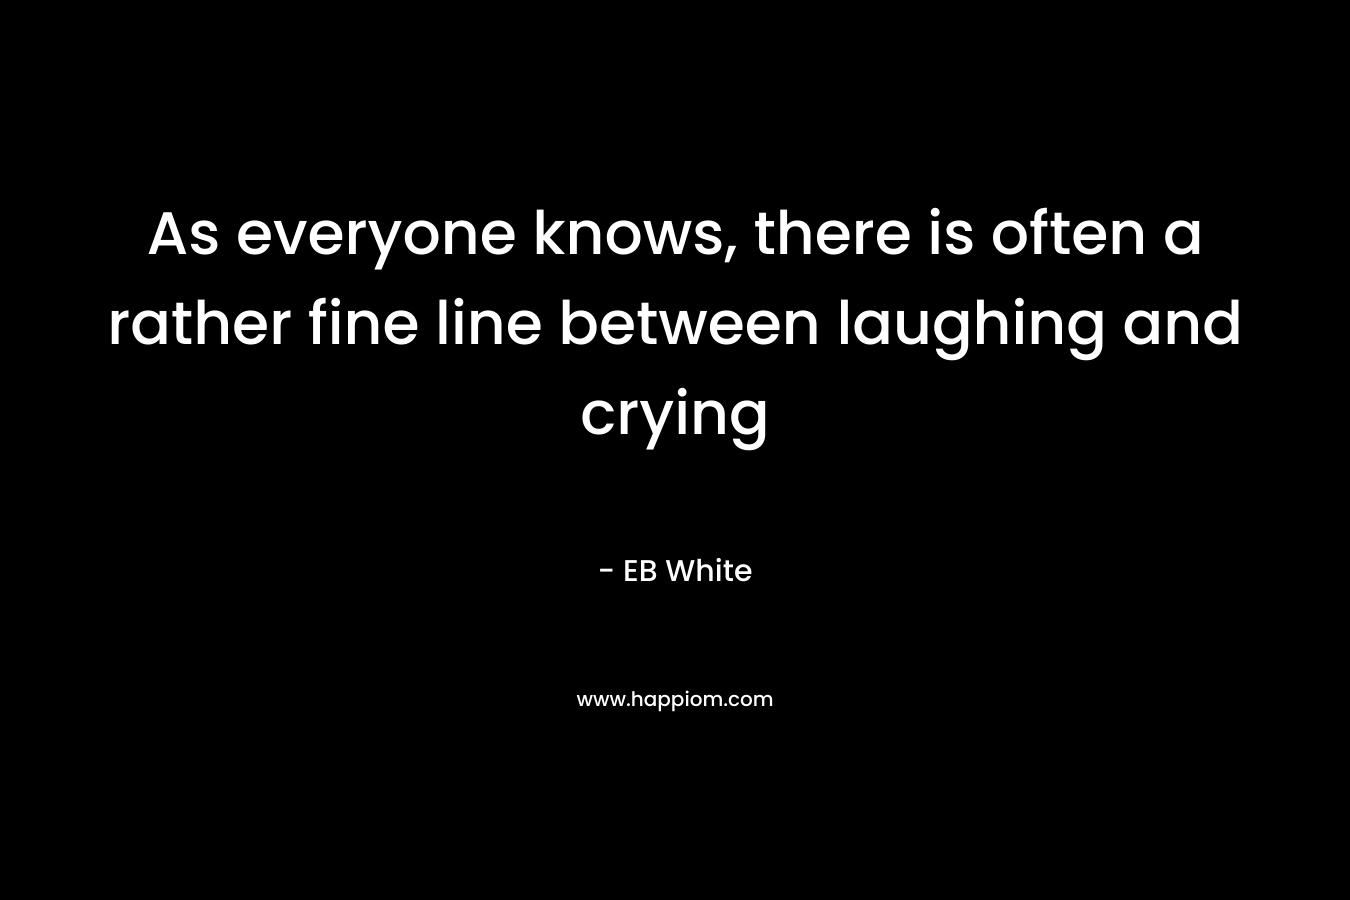 As everyone knows, there is often a rather fine line between laughing and crying – EB White